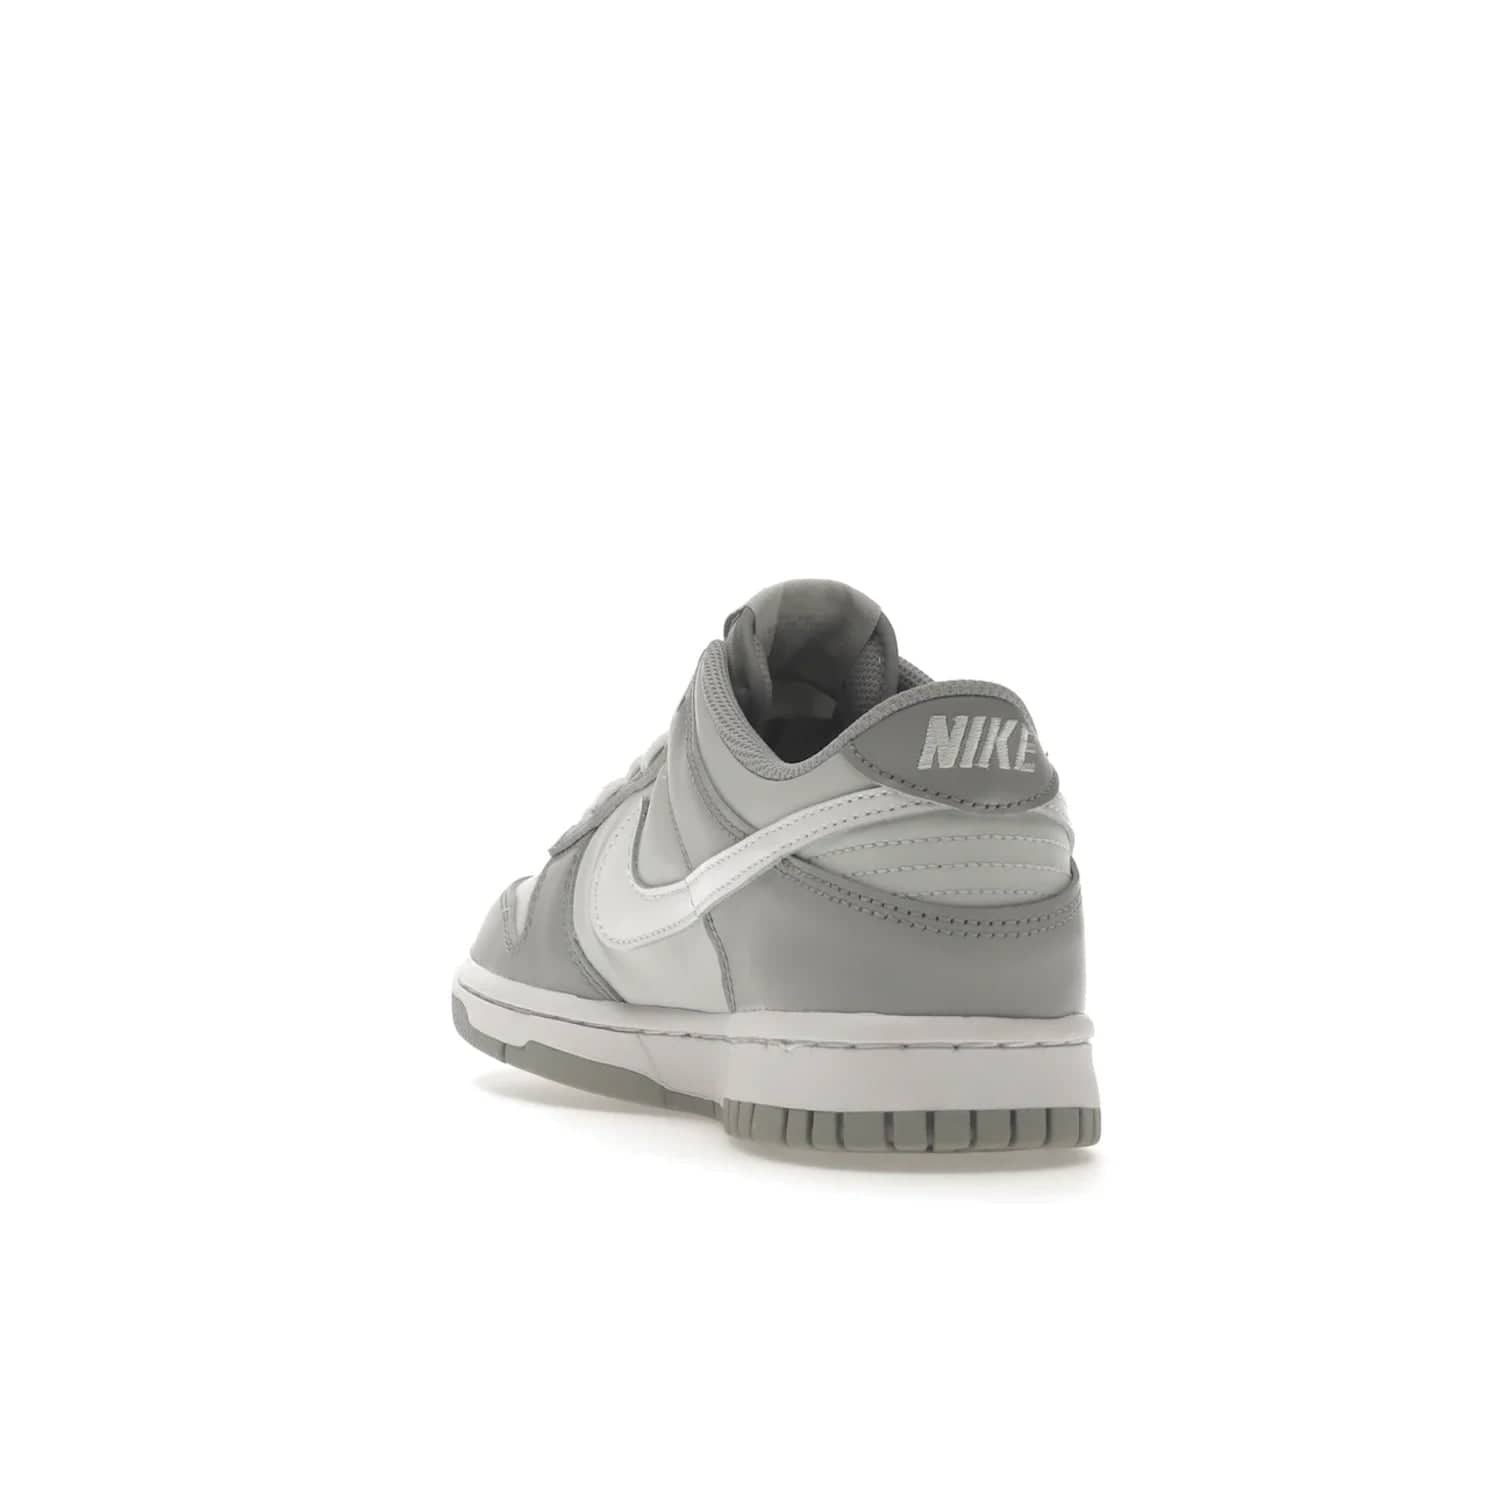 Nike Dunk Low Two-Toned Grey (GS) - Image 26 - Only at www.BallersClubKickz.com - Stylish Nike Dunk Low GS Two-Toned Grey featuring leather build, light/dark grey shades, white Swoosh logo & gray rubber outsole. Get ready to make a statement with this timeless classic released in March 2022.